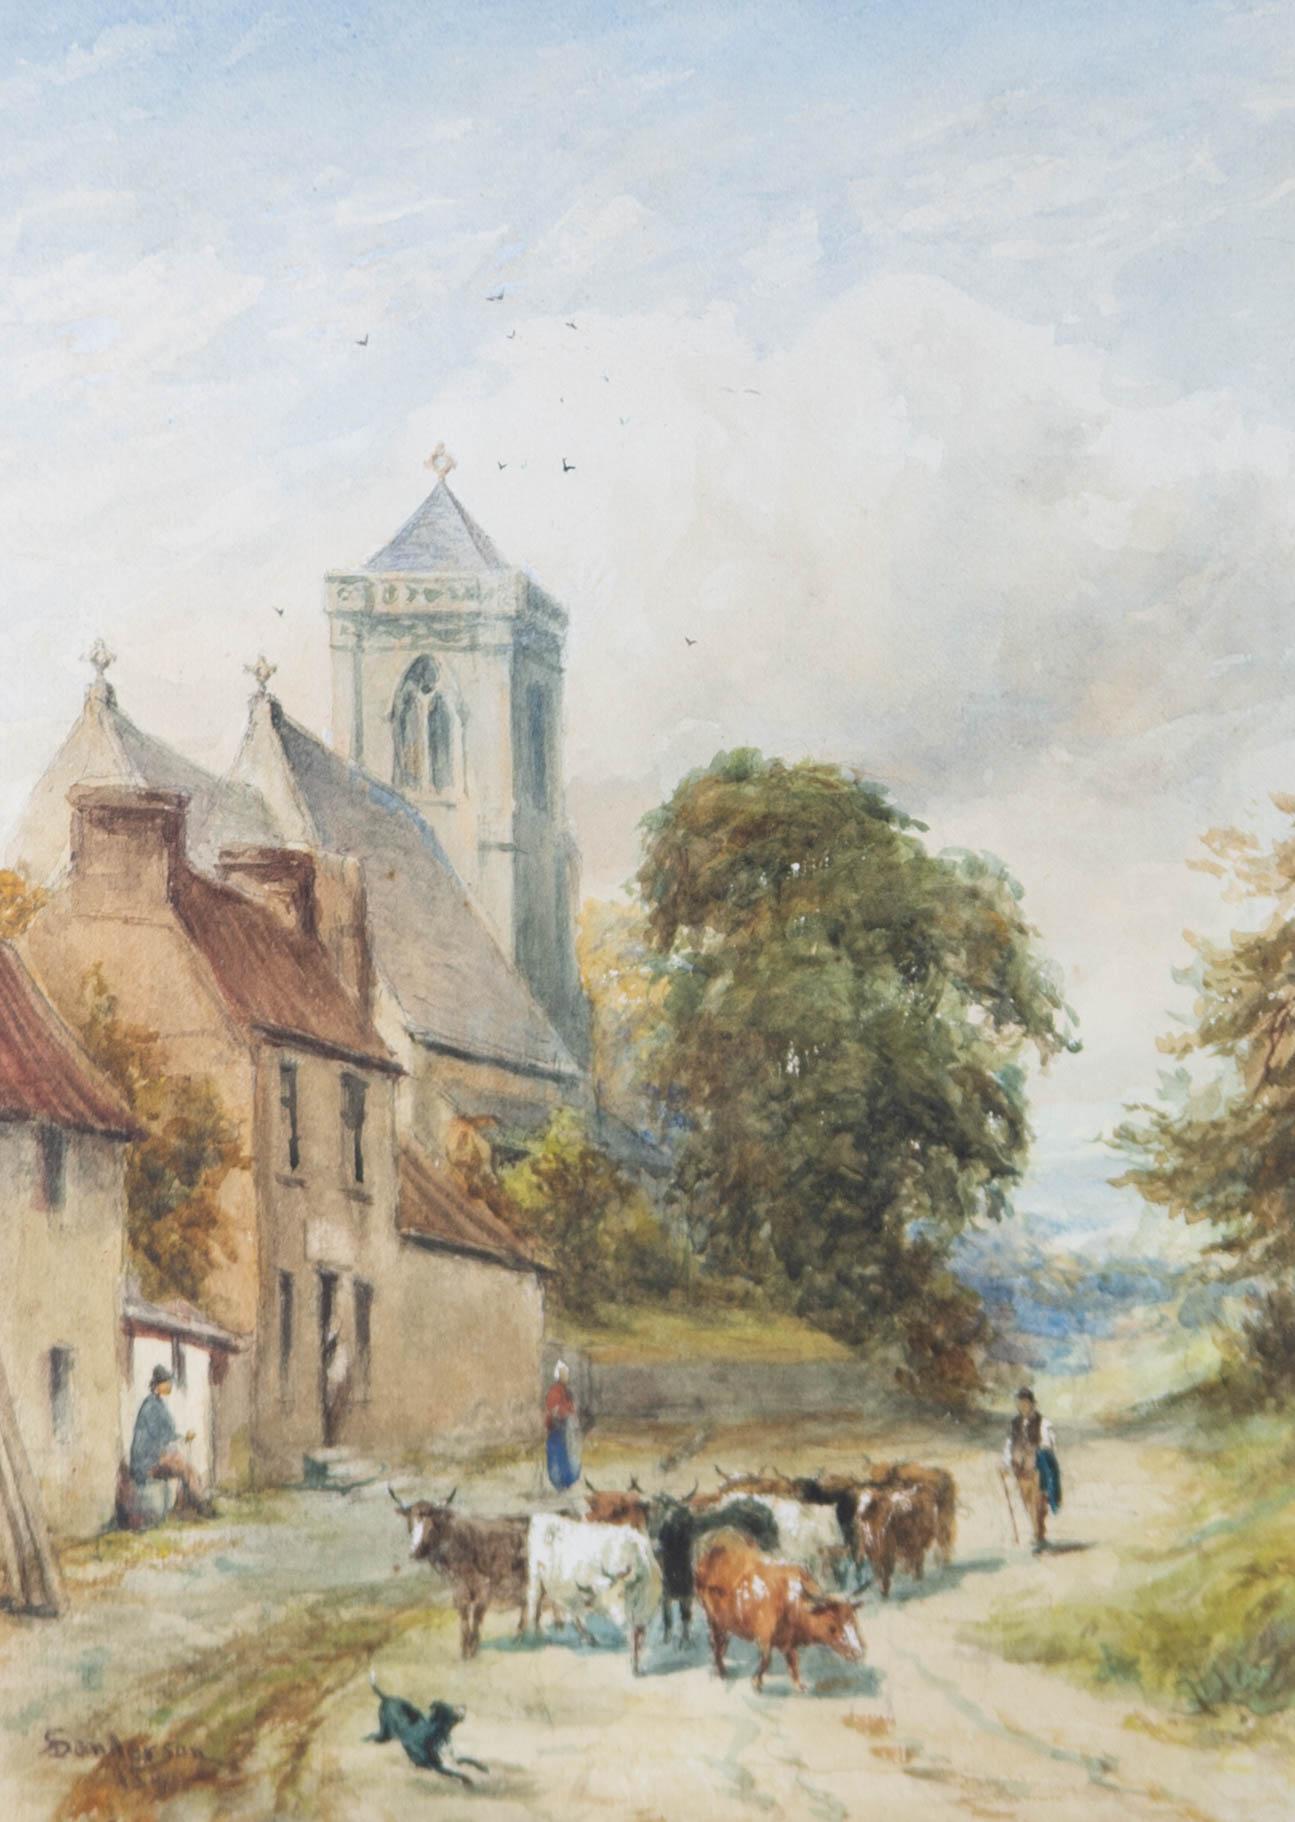 A sheepdog playfully bounds around cattle as a farmer herds his livestock through the sleepy village of Middleton, Yorkshire.

This watercolour has maintained its strong, bright colours, which provide a marvellous sense of depth and immersion.

The